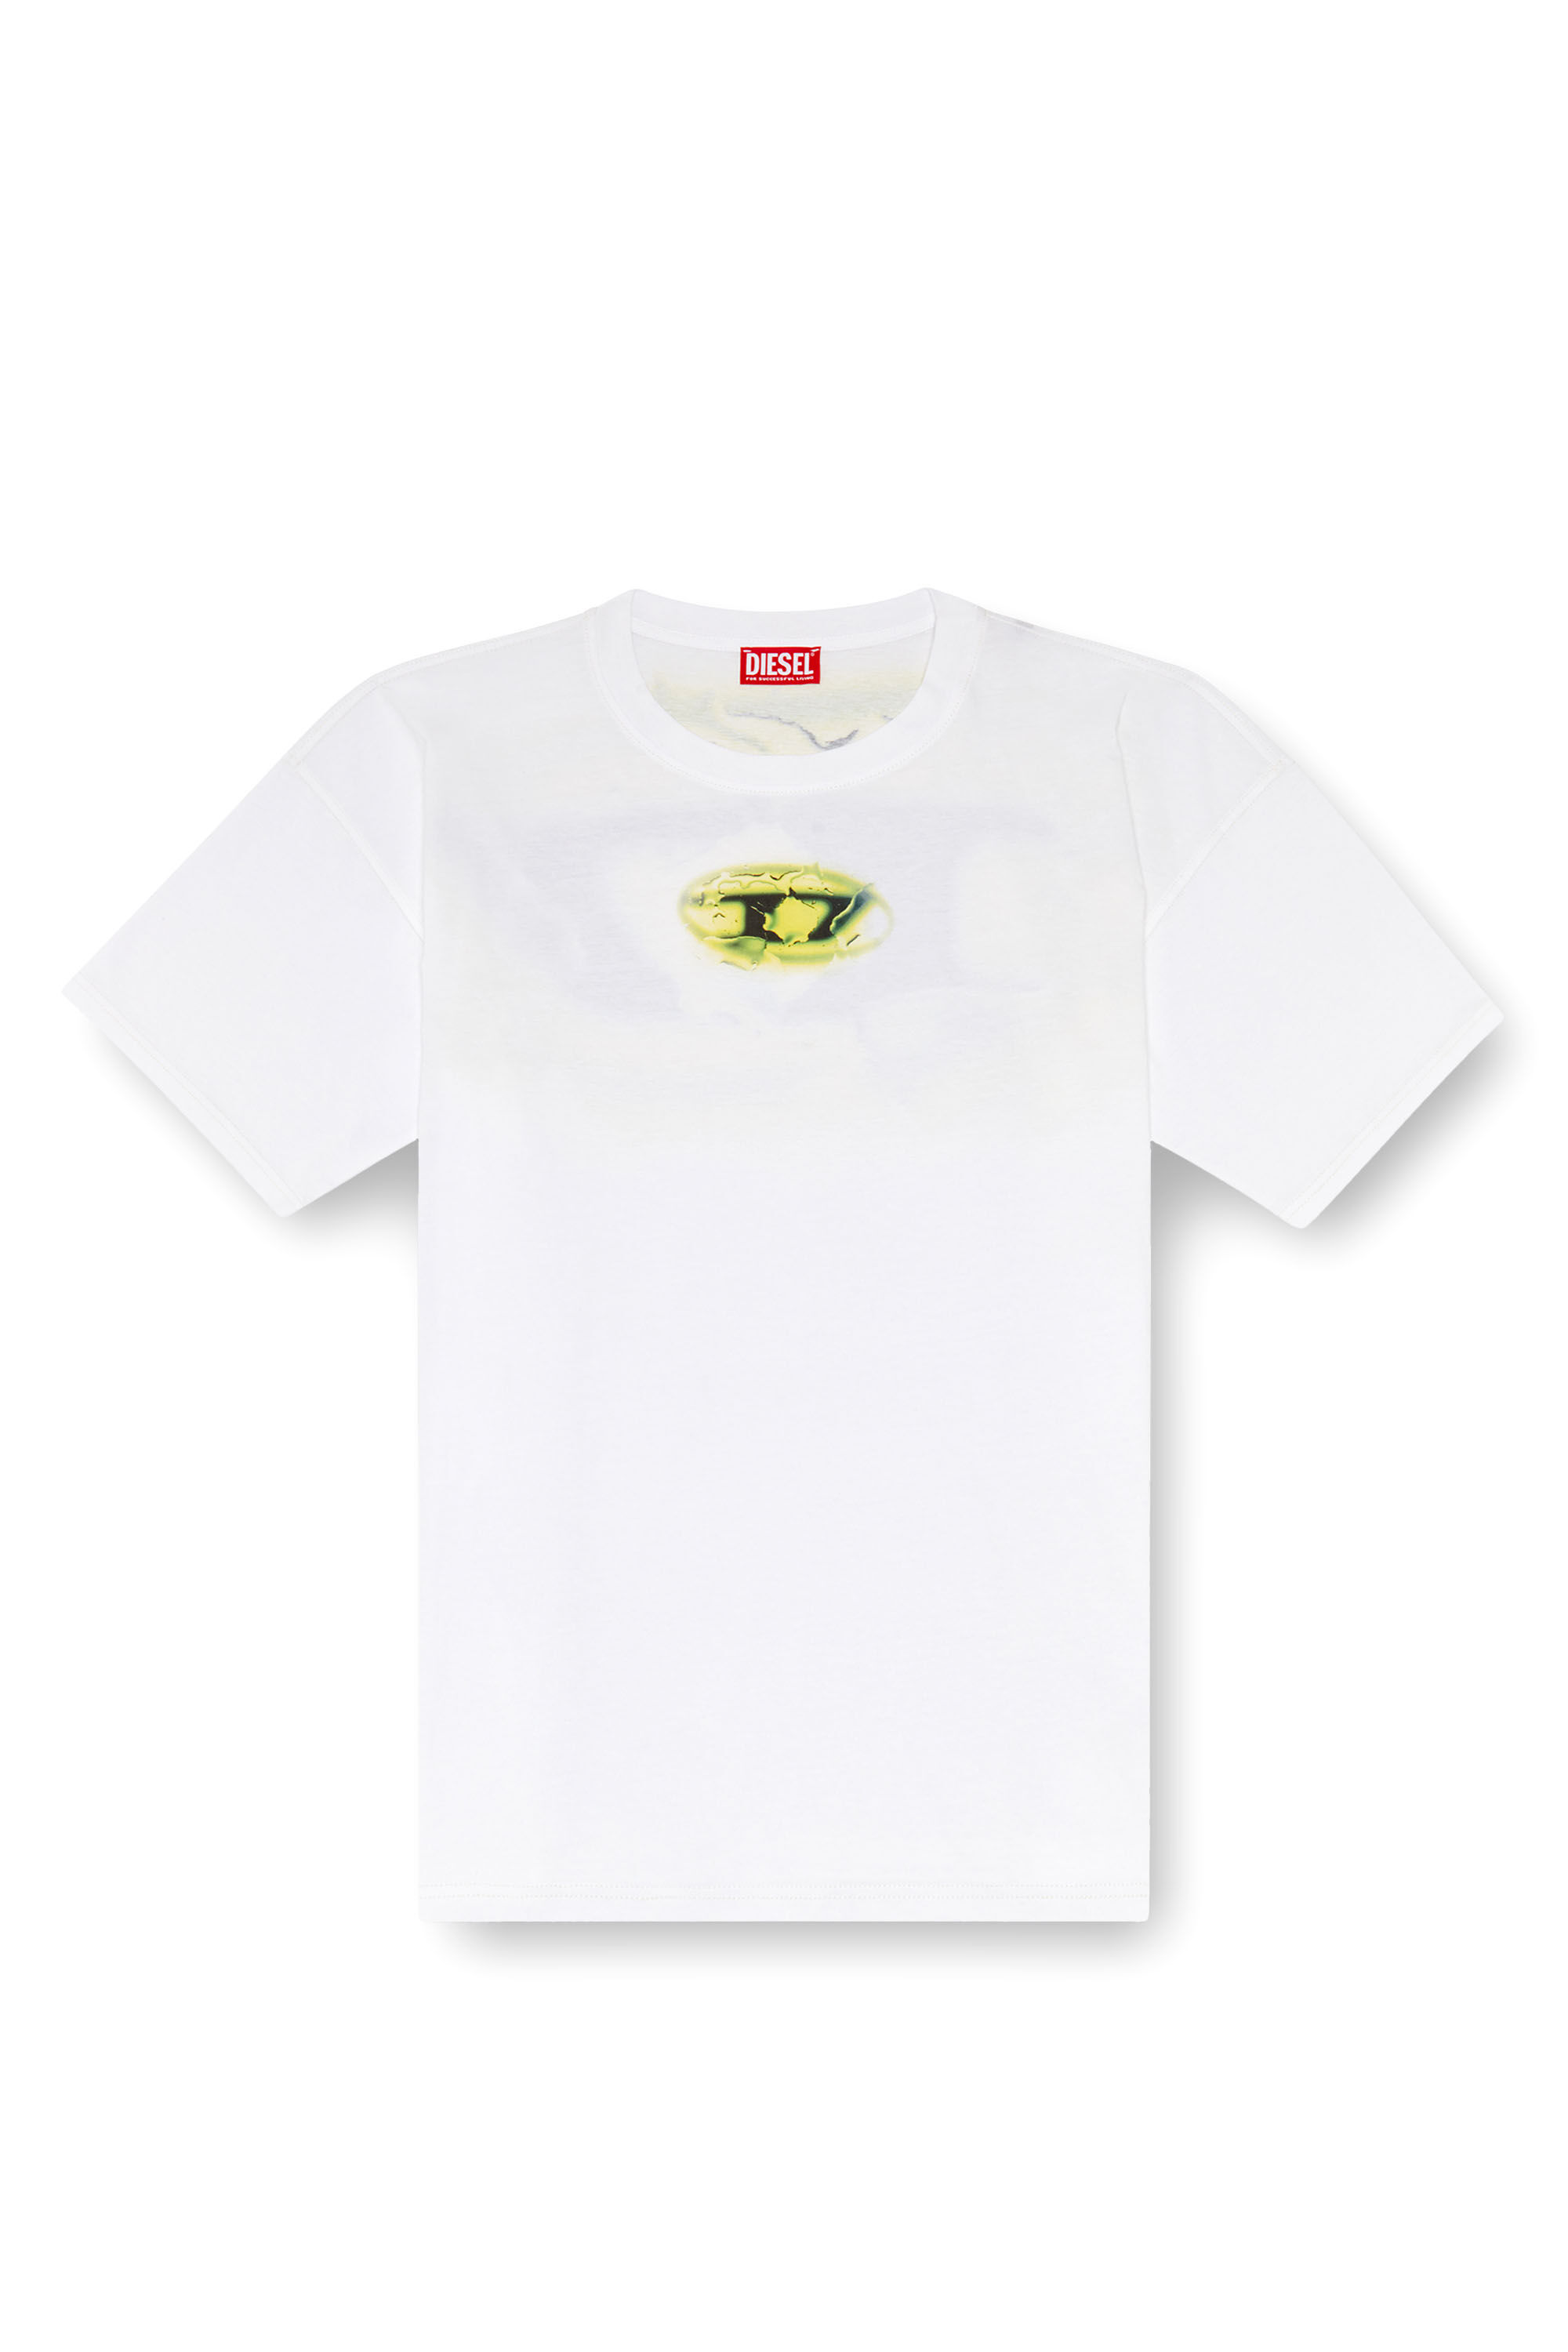 Diesel - T-BOXT-K3, Uomo T-shirt with glowing-effect logo in ToBeDefined - Image 2